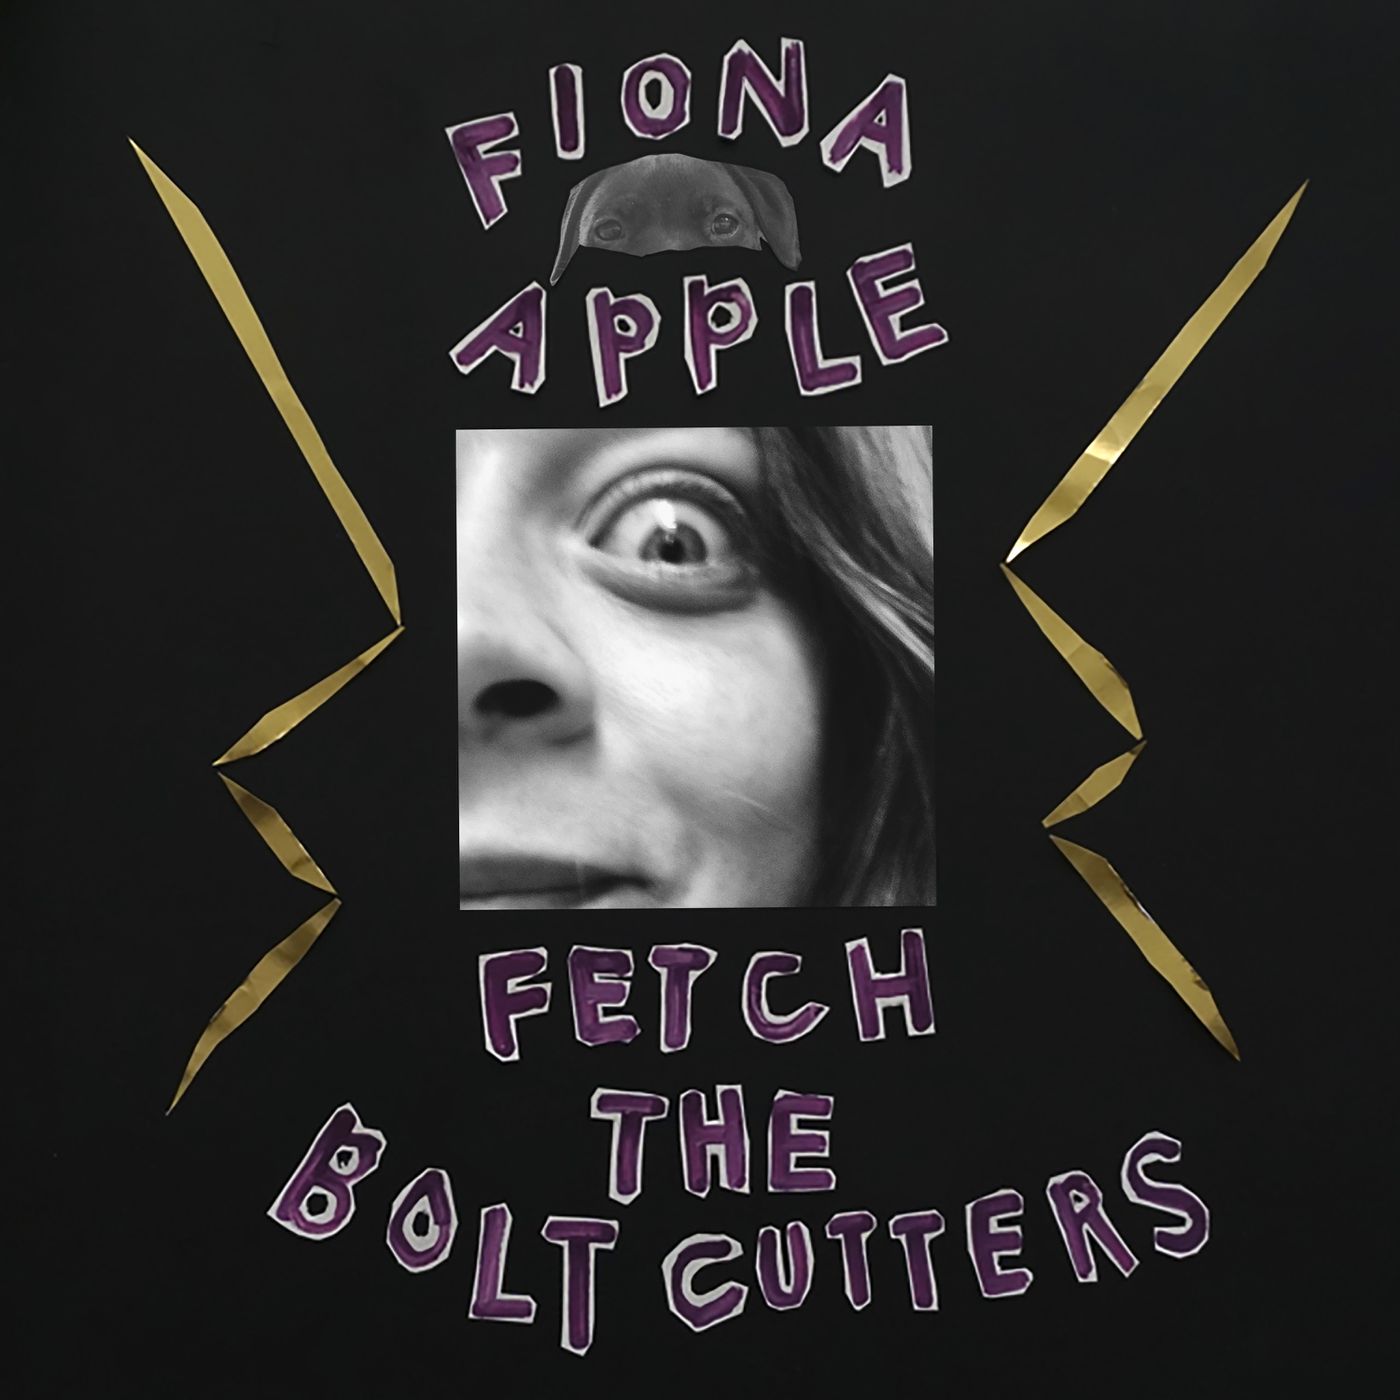 Fiona Apple album review: Fetch the Bolt Cutters sounds like 2020 feels -  Vox